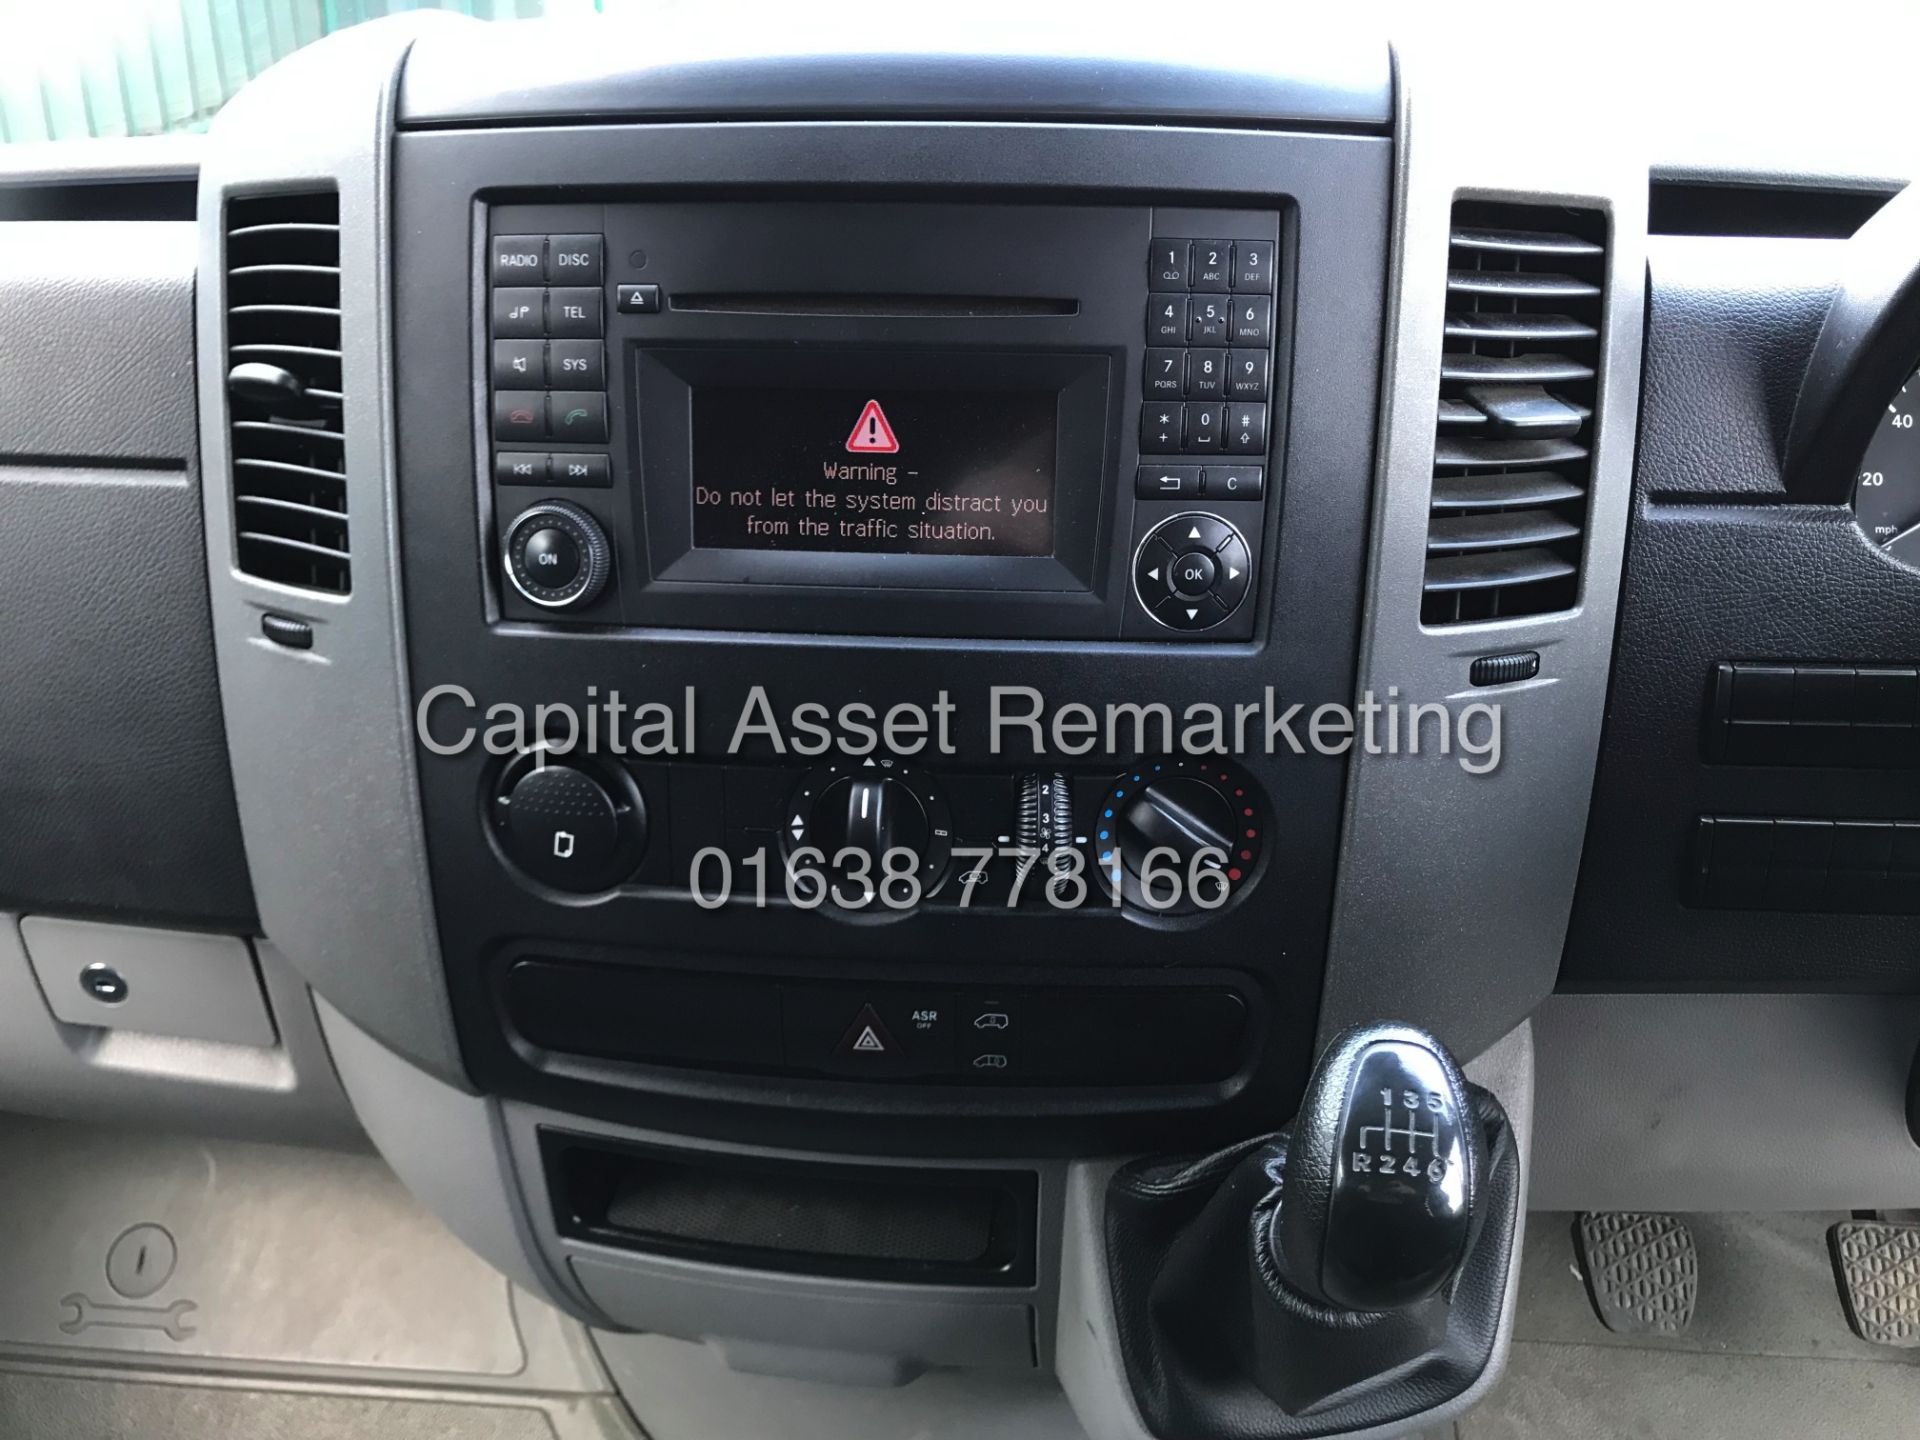 (ON SALE) MERCEDES SPRINTER 2.2CDI MWB / HIGH ROOF (2013 MODEL) 1 OWNER - LOW MILES - Image 10 of 15